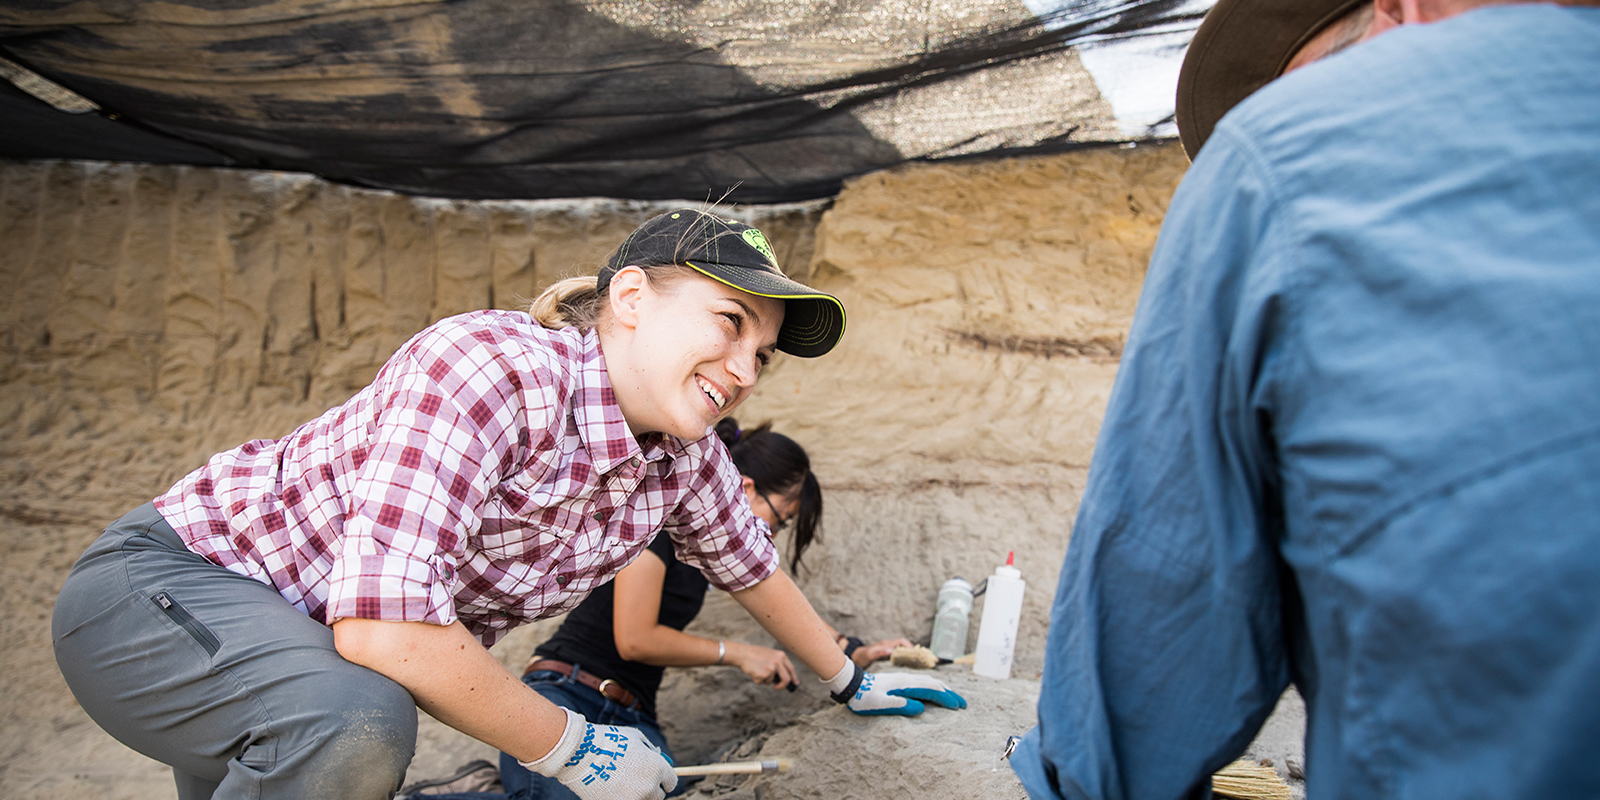 A woman in dirty working clothes smiling at another person under a canopy on a paleontology dig